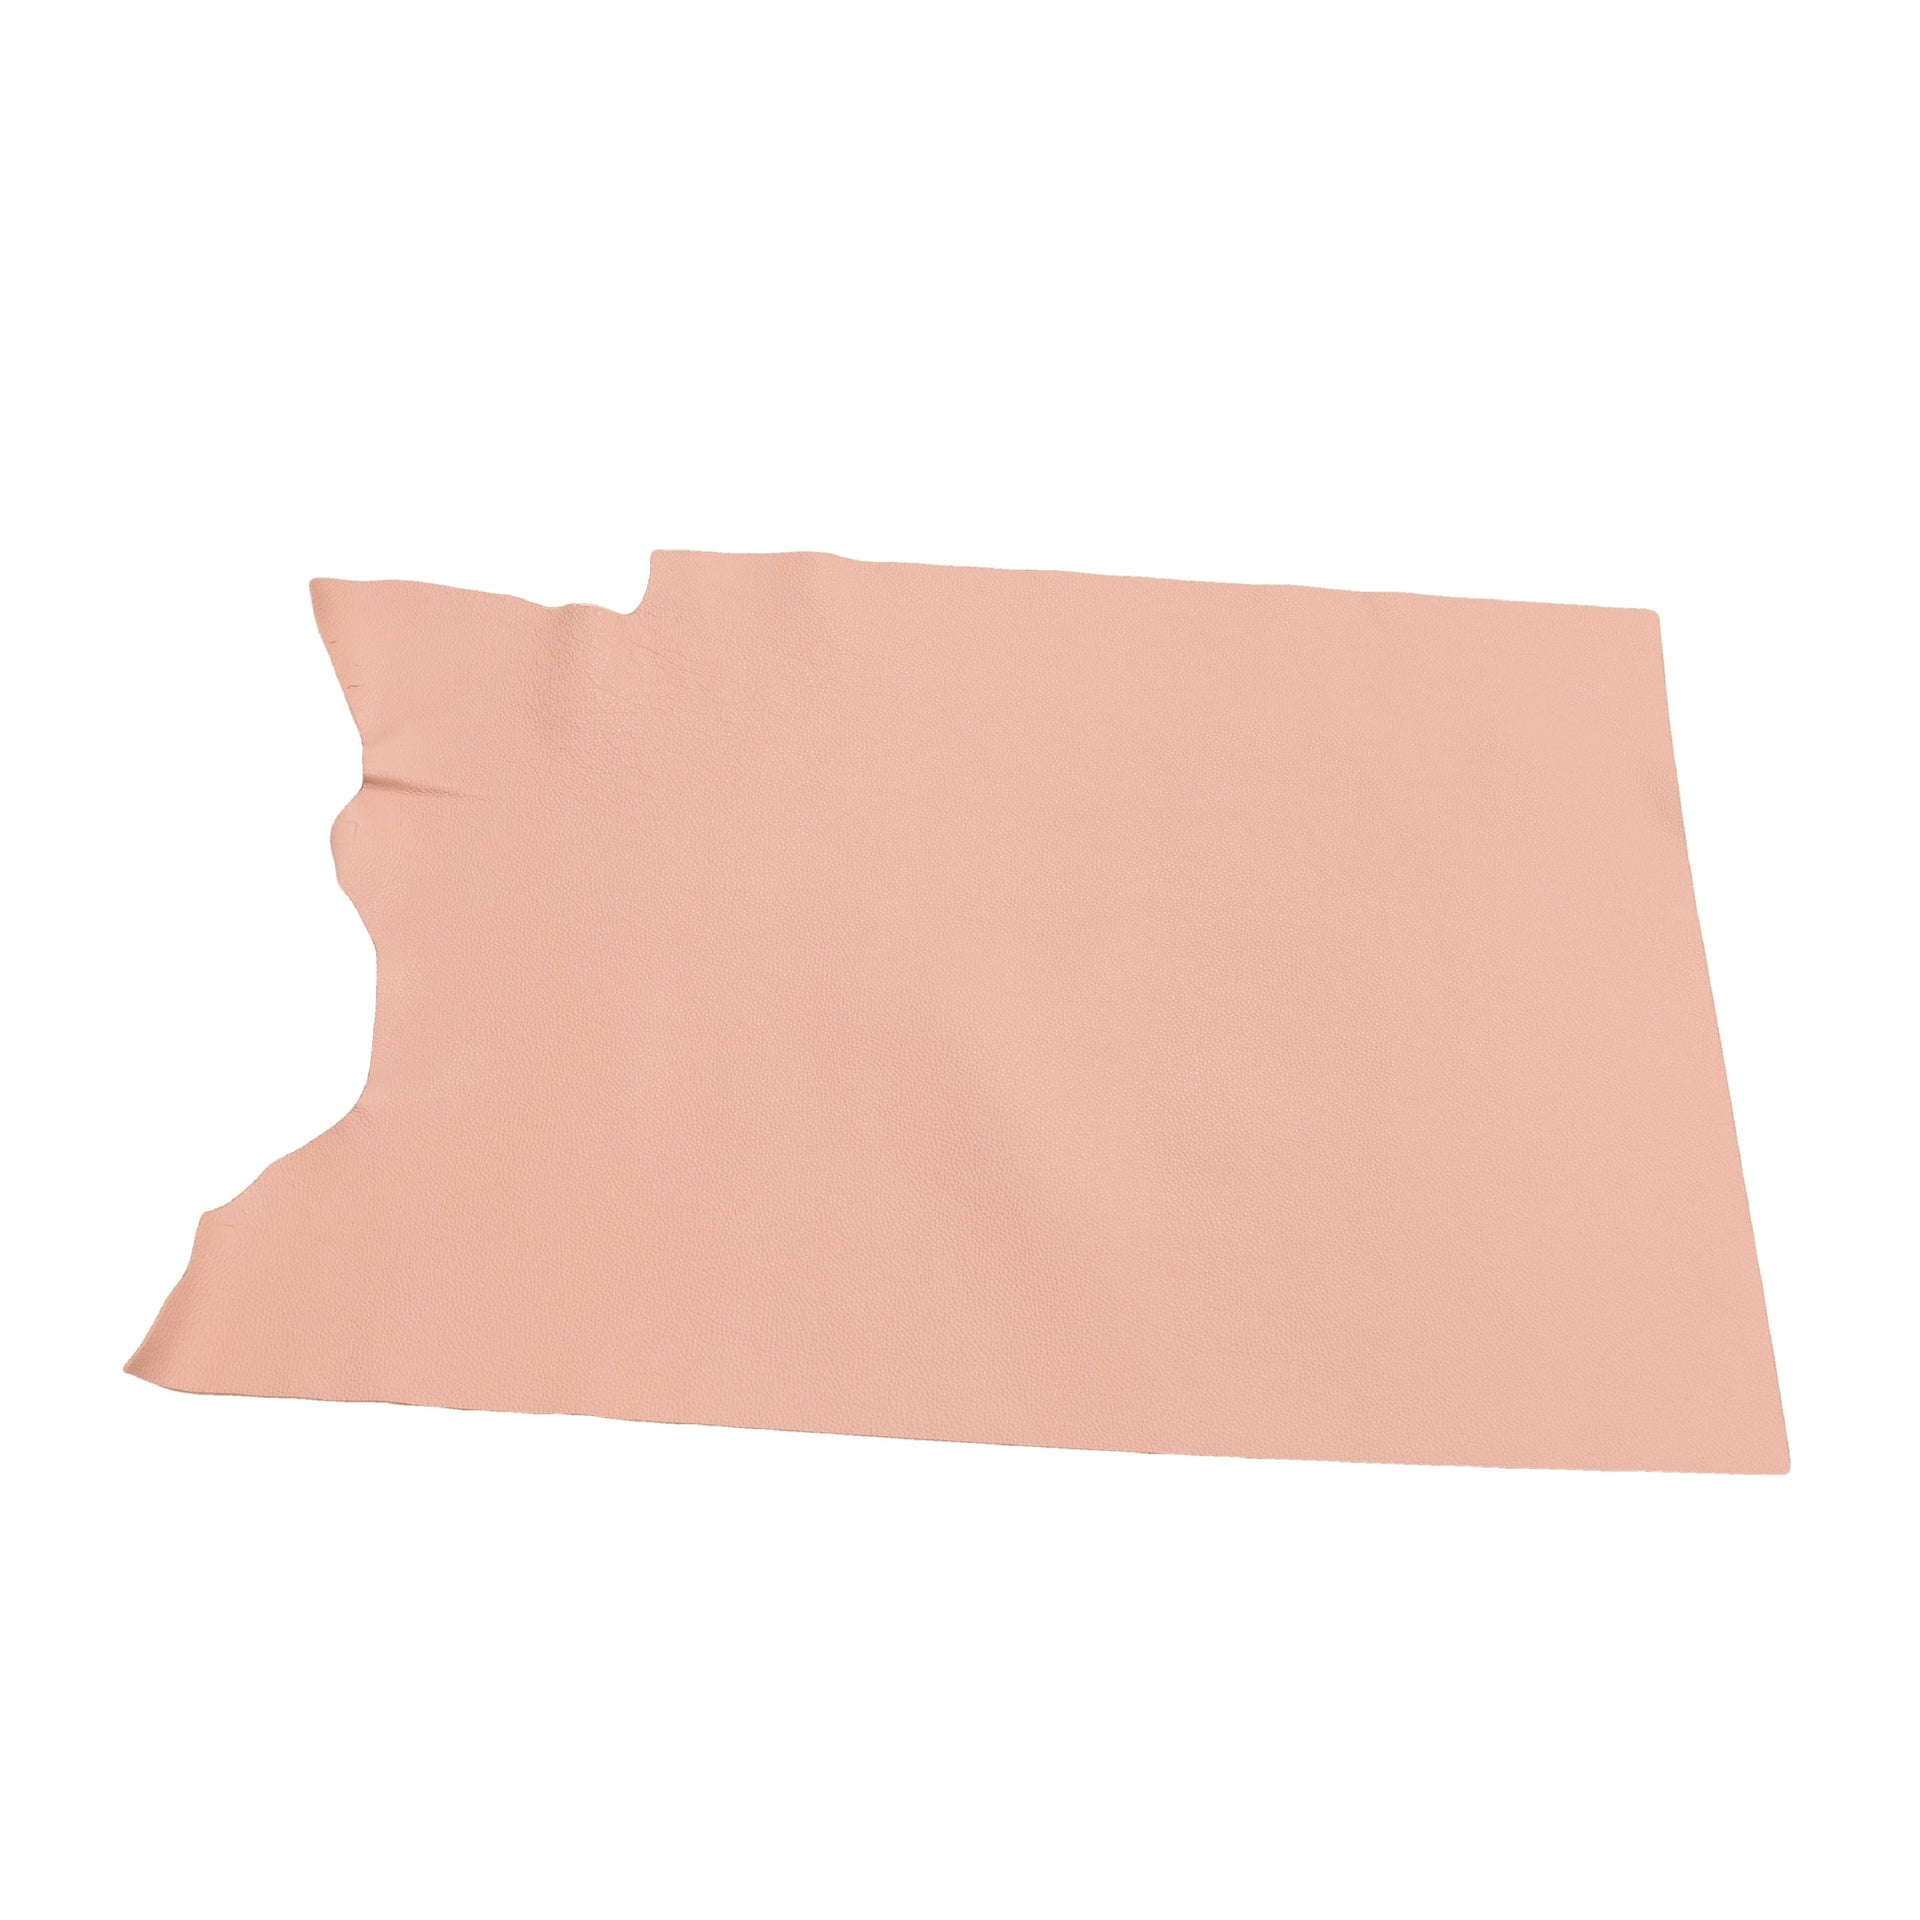 San Diego Sweet Pink Tried n True 3-4 oz Leather Cow Hides, 6.5-7.5 Square Foot / Project Piece (Middle) | The Leather Guy